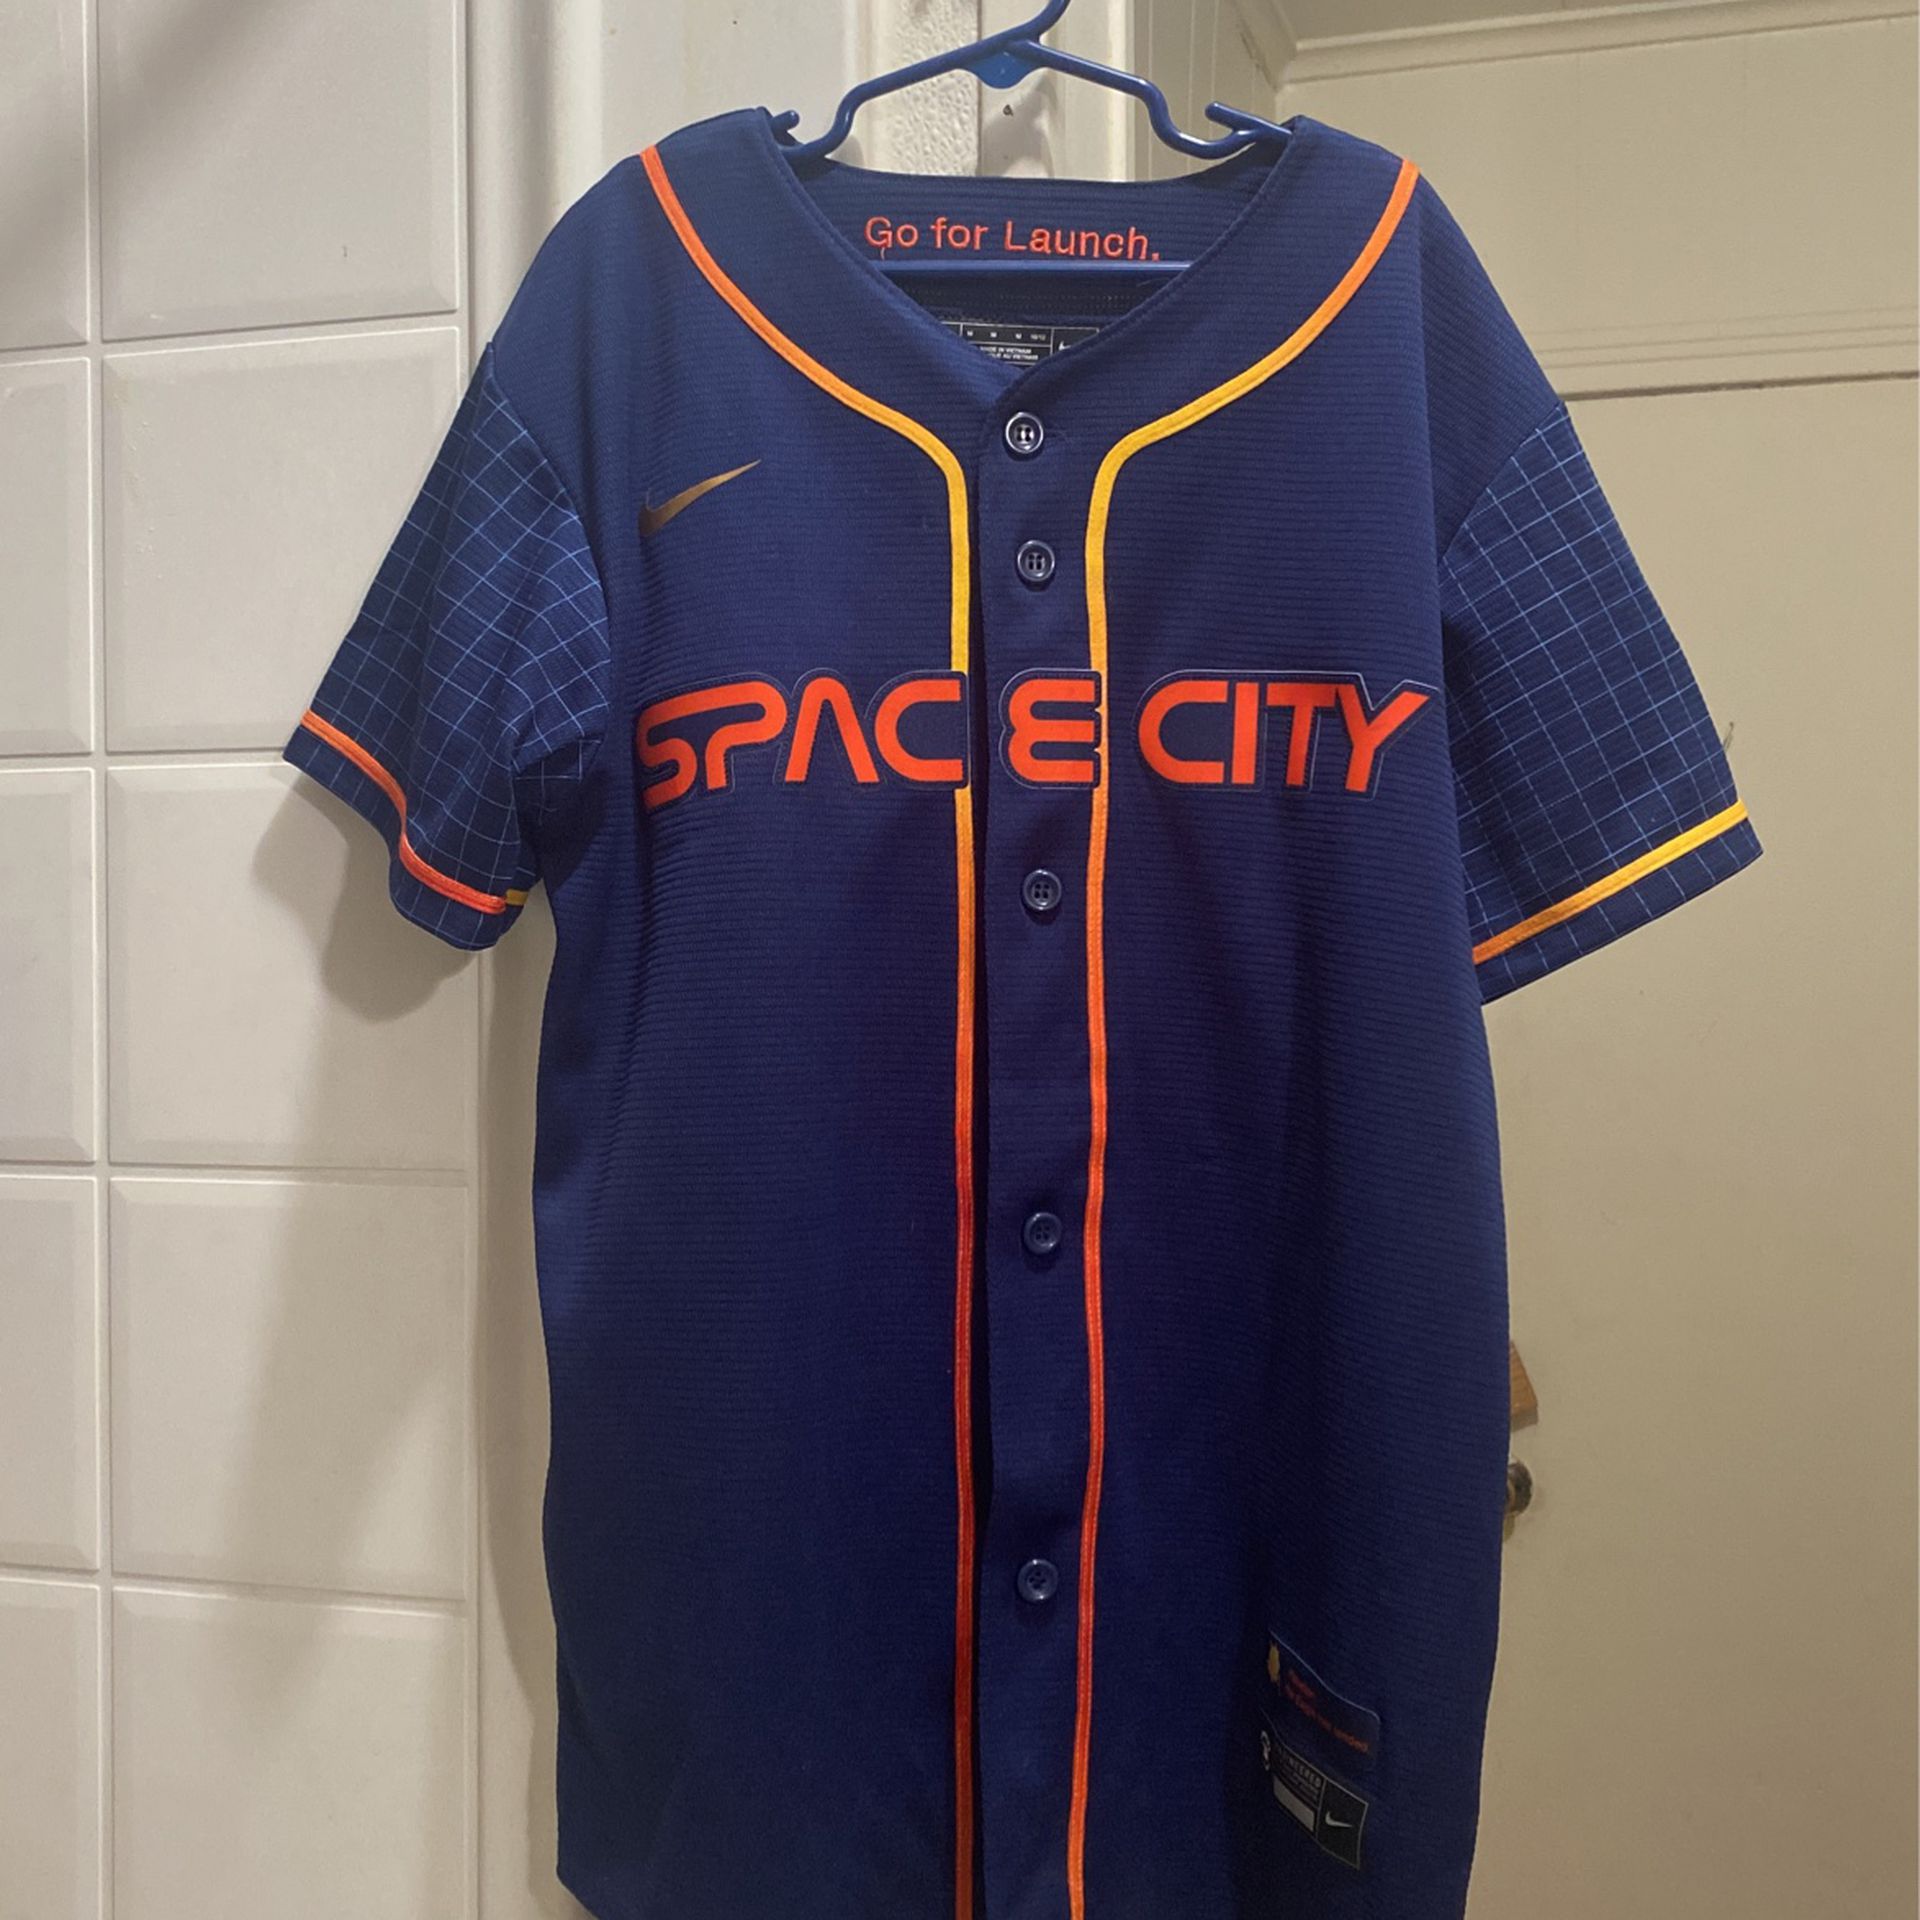 Astros PENA Jersey for Sale in Port Isabel, TX - OfferUp